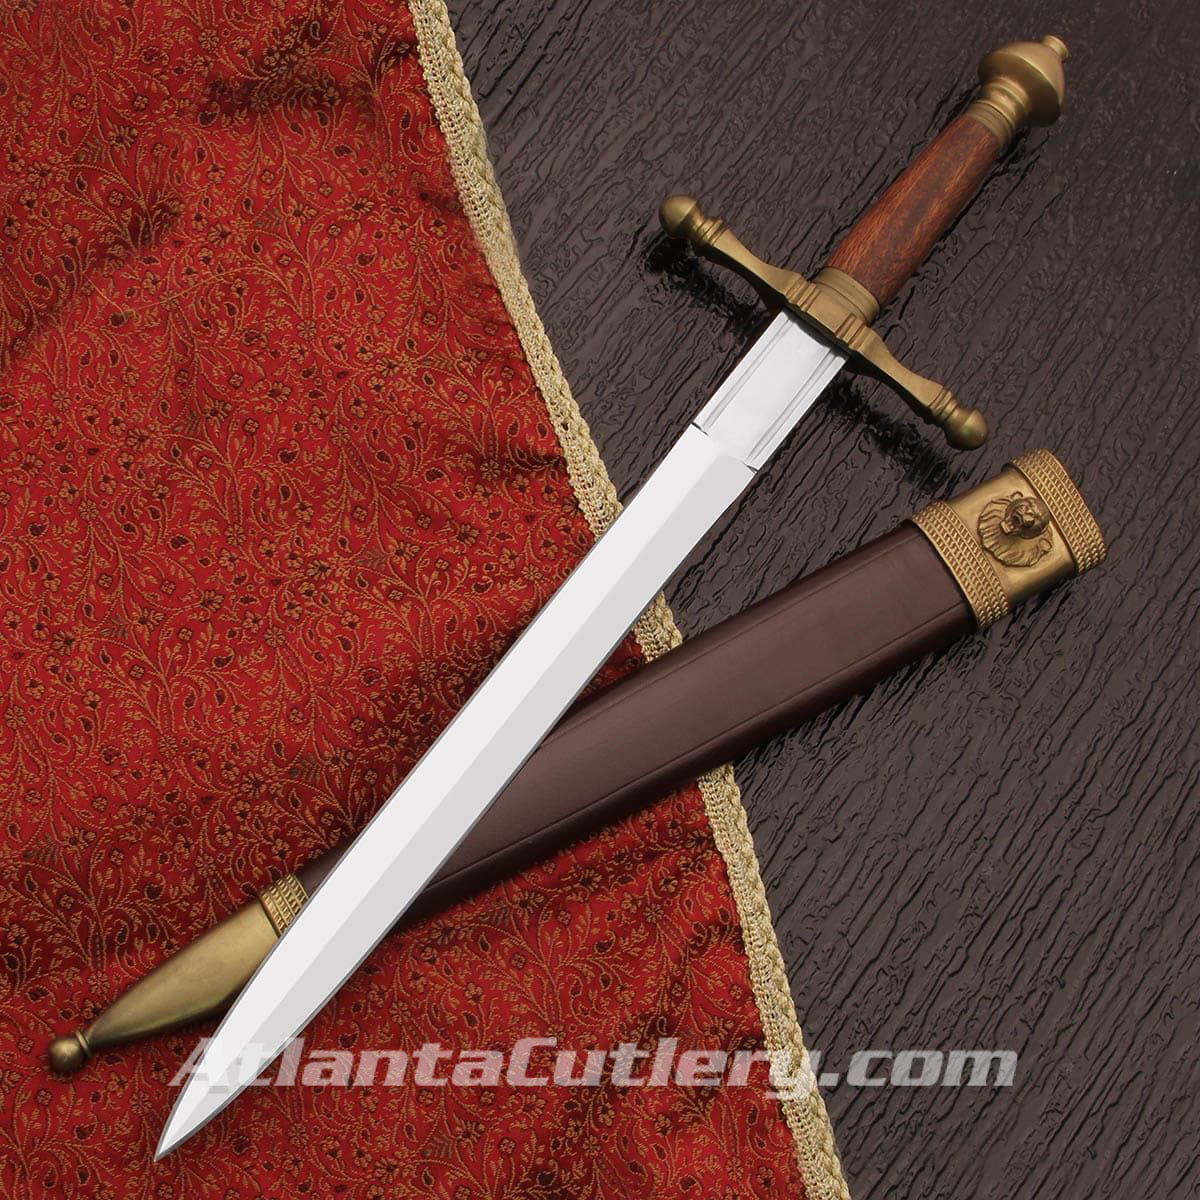 Bramham Moor Medieval Dagger by Windlass has high carbon steel blade, matte brass fittings and leather scabbard with lion's head